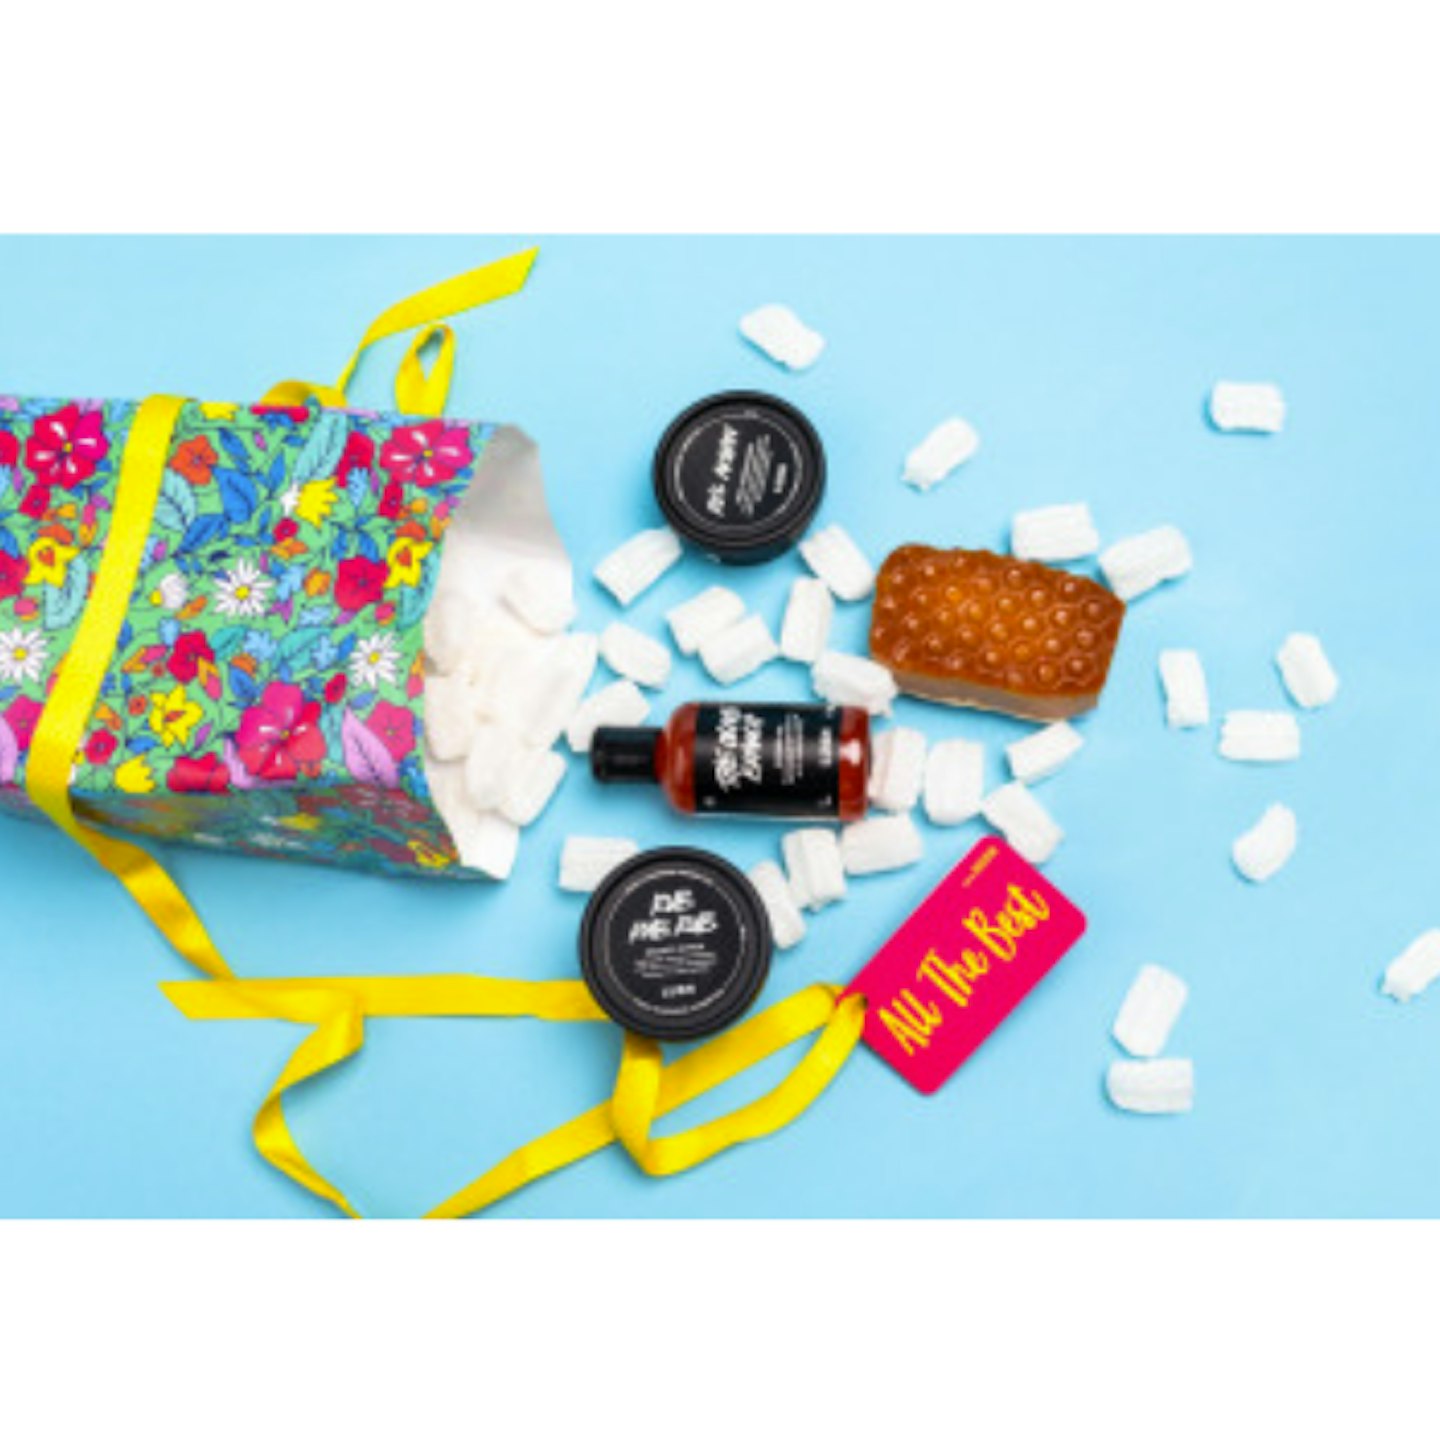 Lush All The Best Gift Set